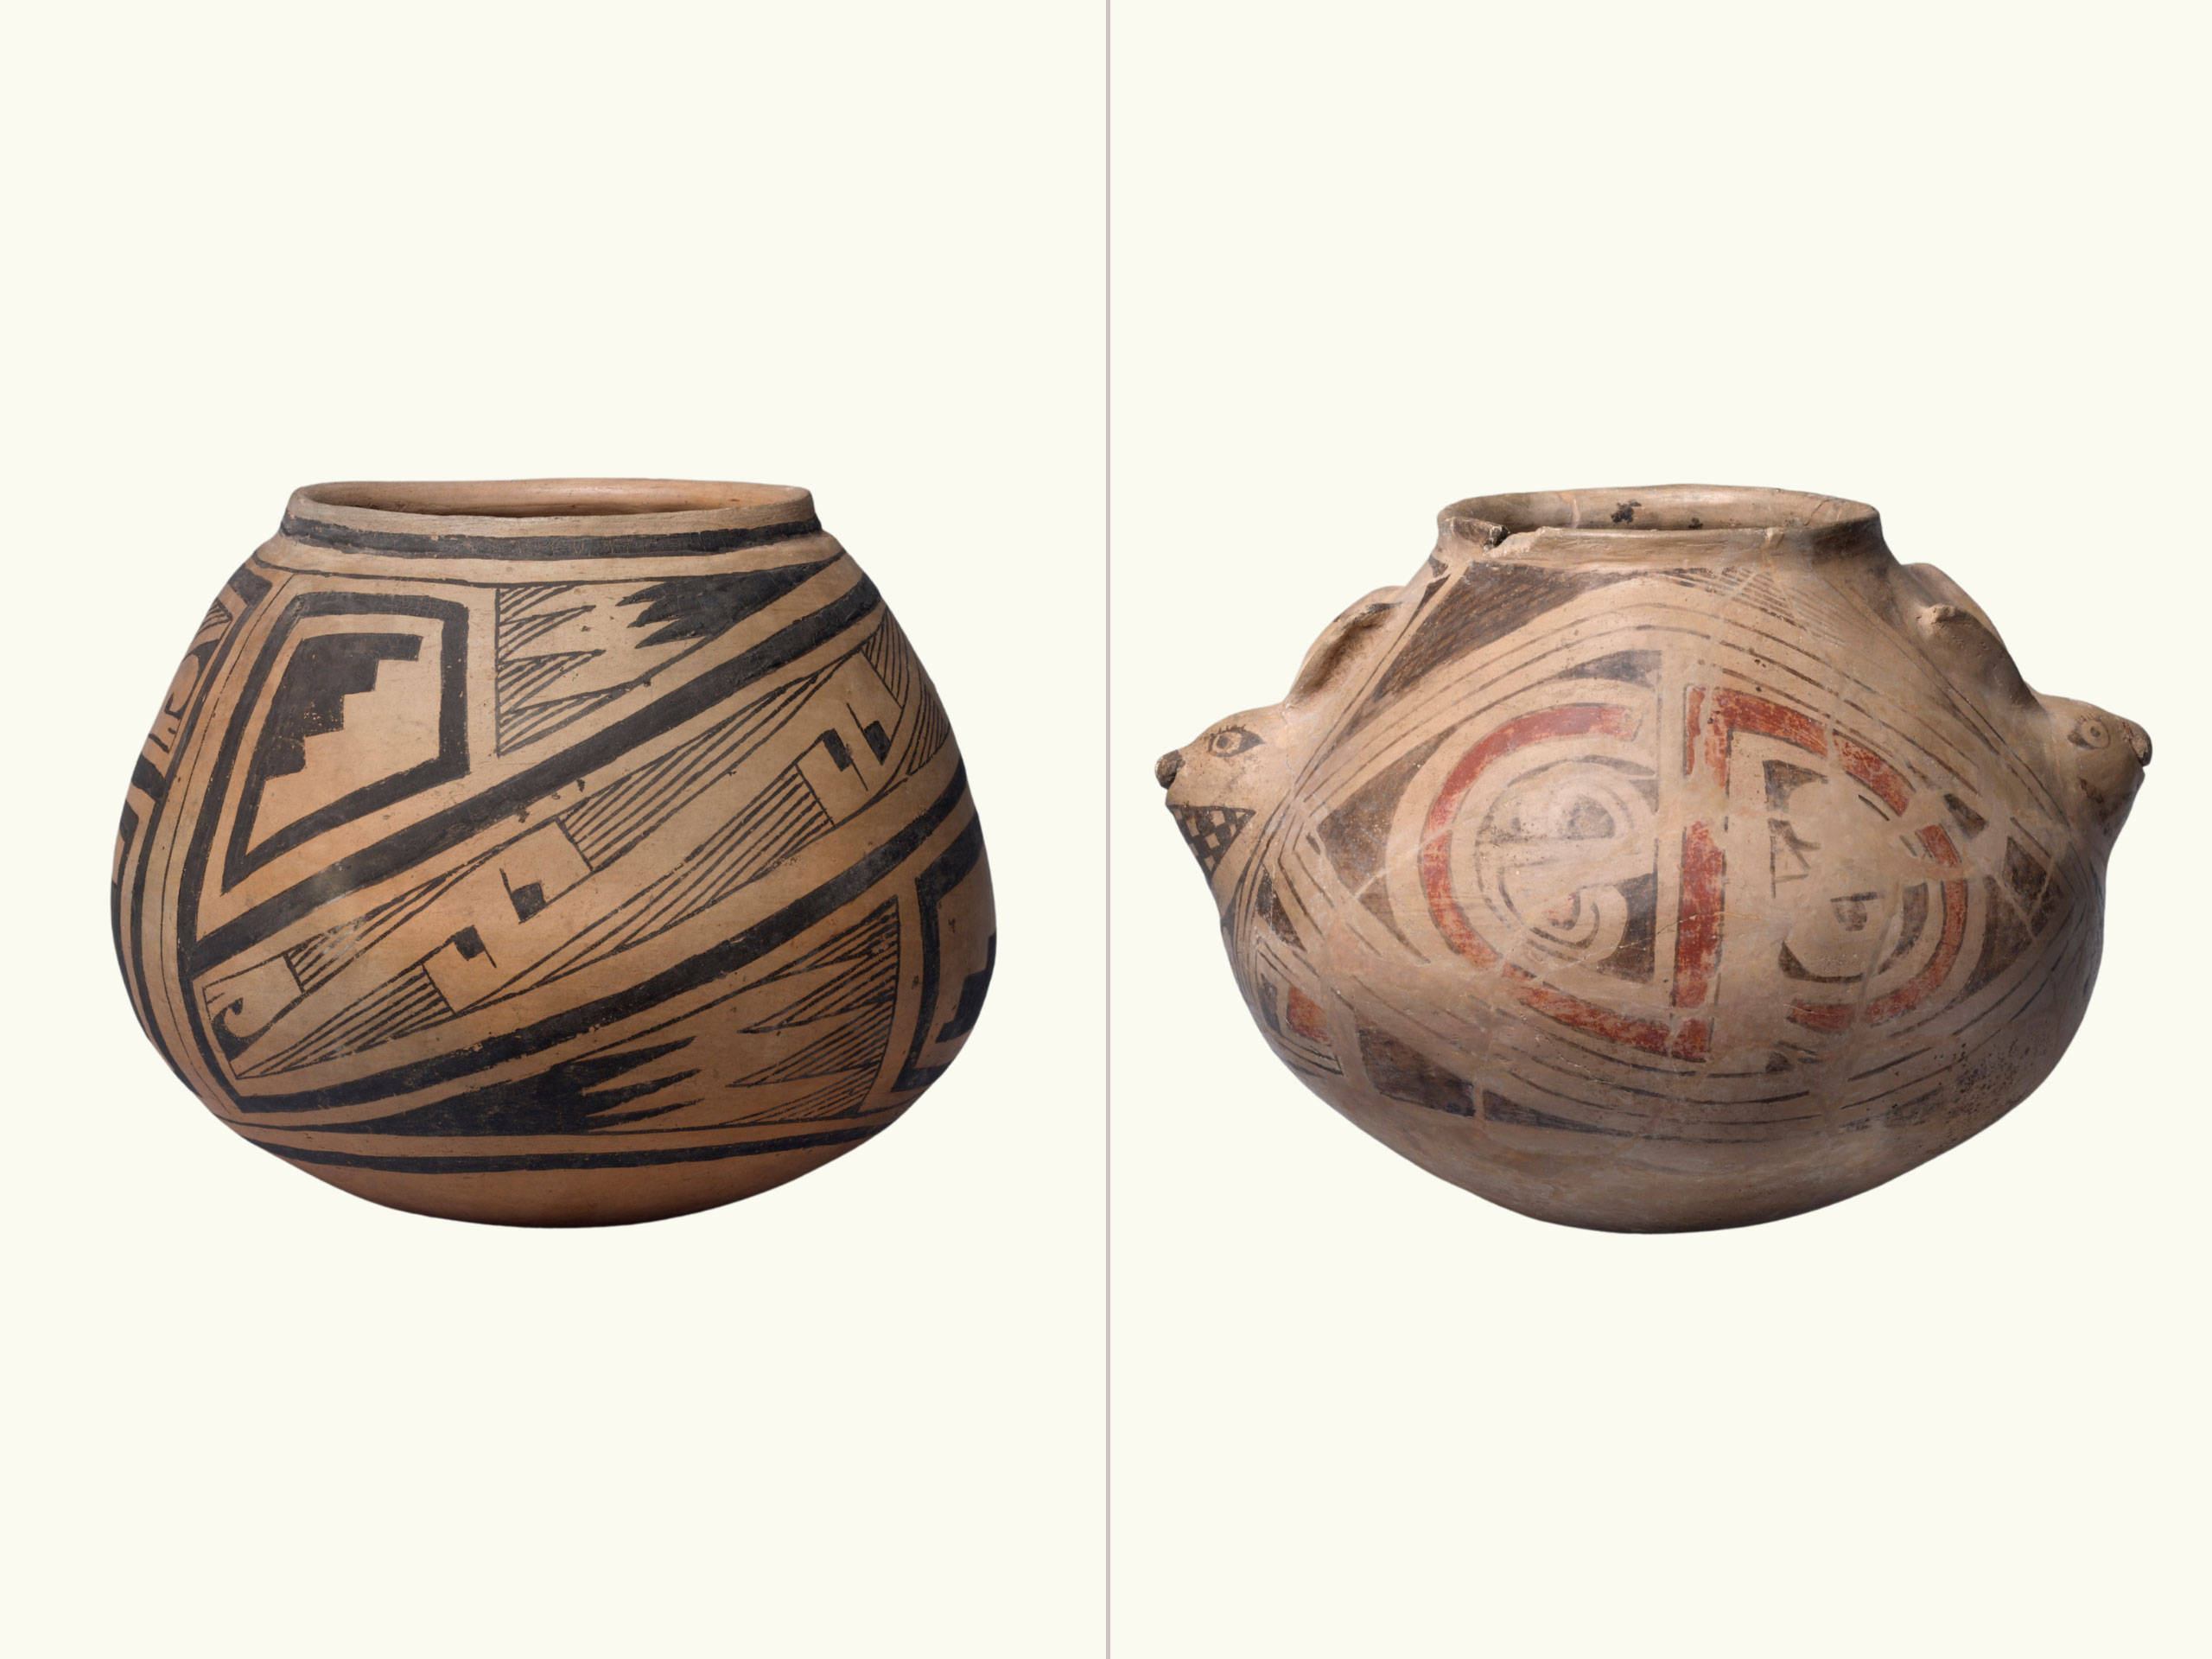 A comparison of two objects: A polychrome painted ceramic bowl with thick-lined geometric shapes and, a polychrome painted ceramic bowl with rabbit heads on either side of the bowl.